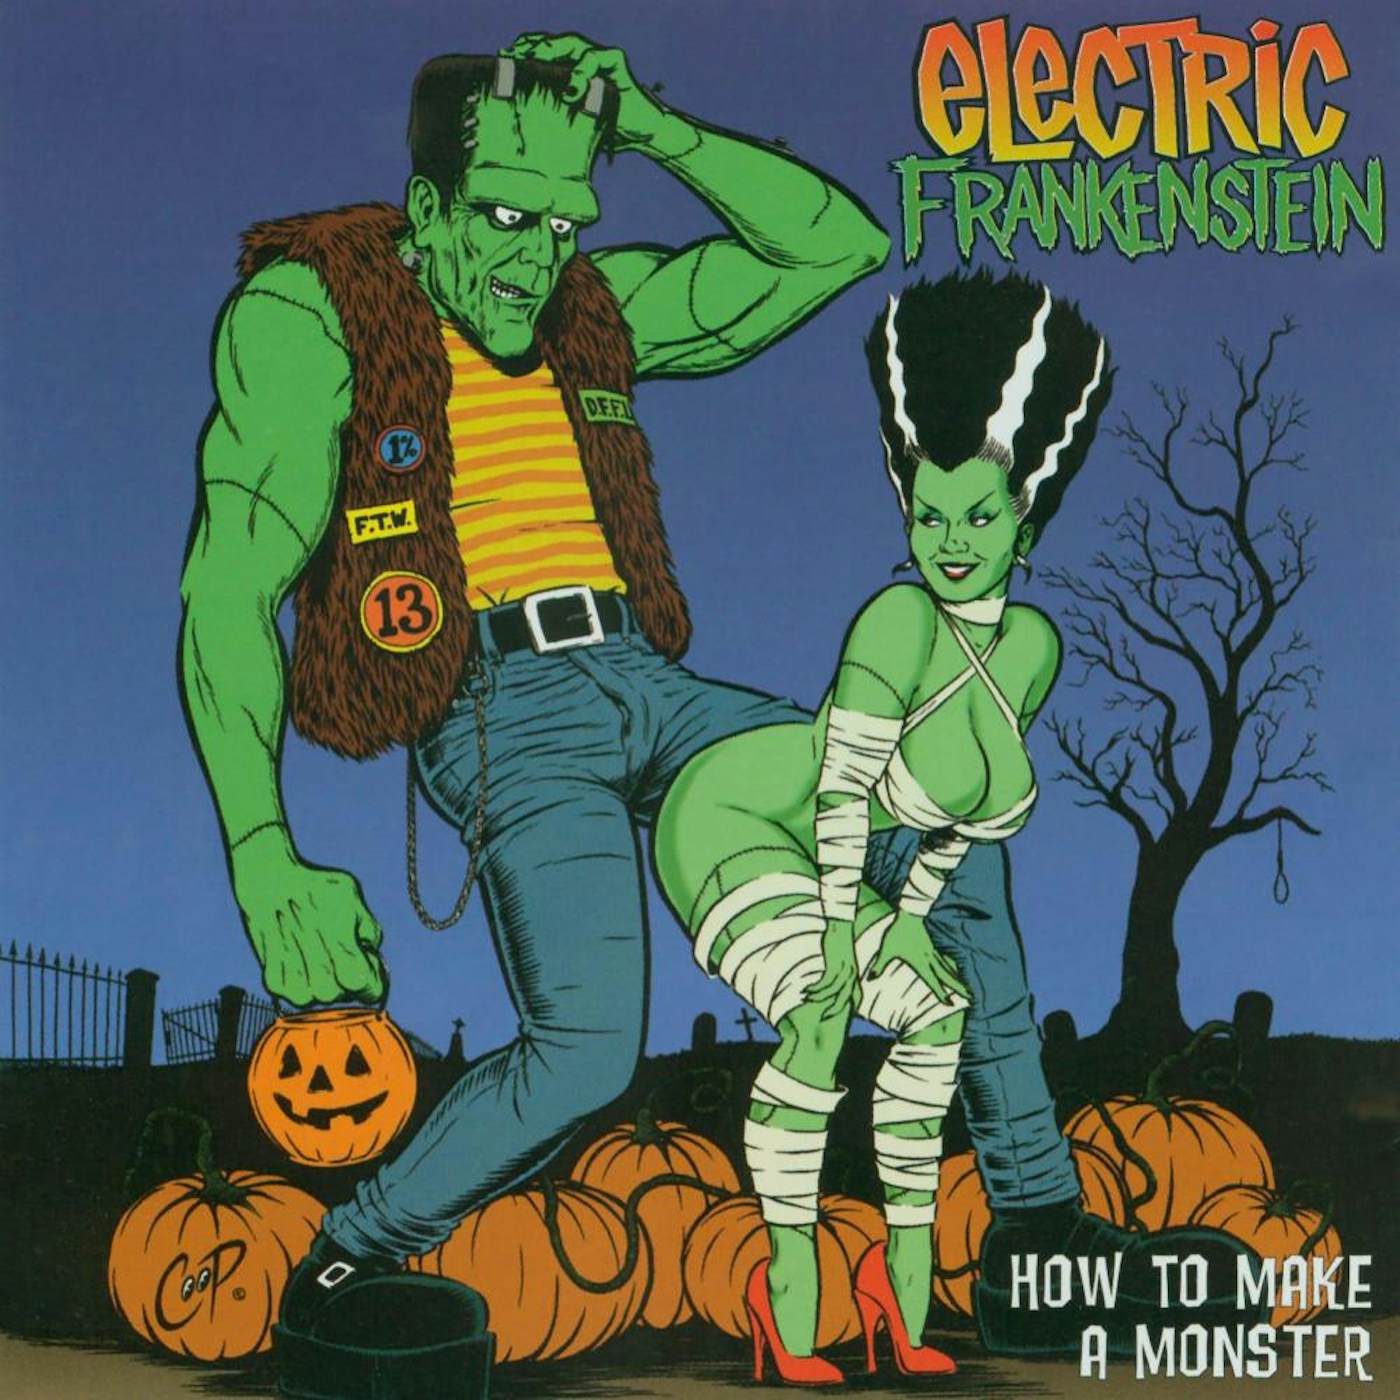 Electric Frankenstein HOW TO MAKE A MONSTER (20TH ANNIVERSARY EDITION) Vinyl Record